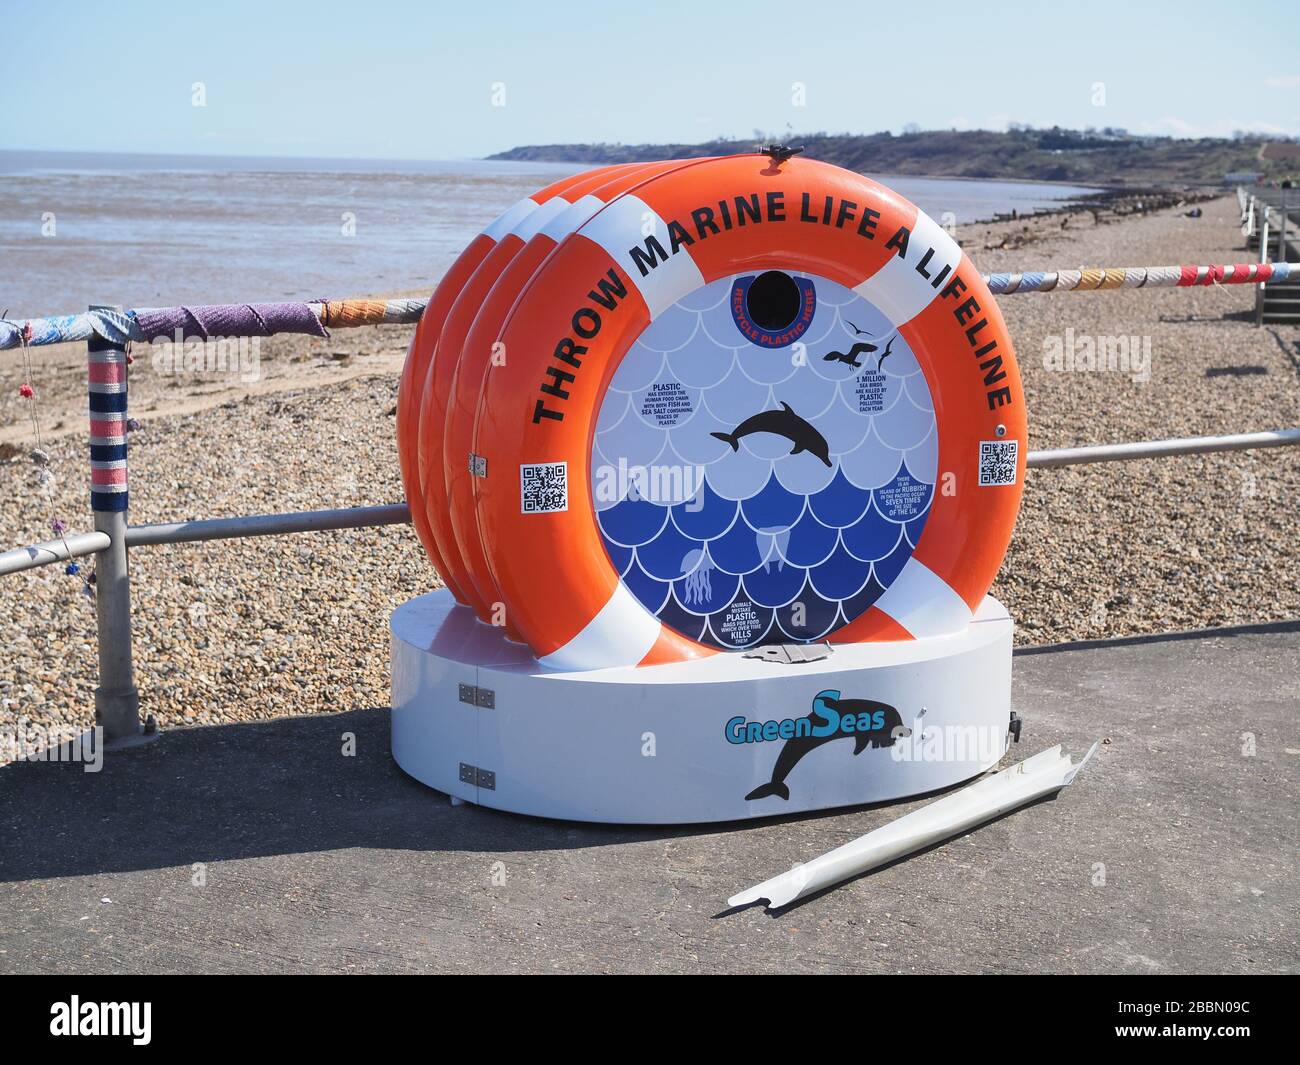 Minster on Sea, Kent, UK. 1st Apr, 2020. A new distinctively 'BinForGreenSeas' has been installed in Minster on Sea, Kent. The aim of the GreenSeas Trust project is to locate more of these special bins in the next six years in major coastal towns around the country, to act as a visual trigger and enable people to make the connection between rubbish discarded on beaches and its effect on marine life. Credit: James Bell/Alamy Live News Stock Photo